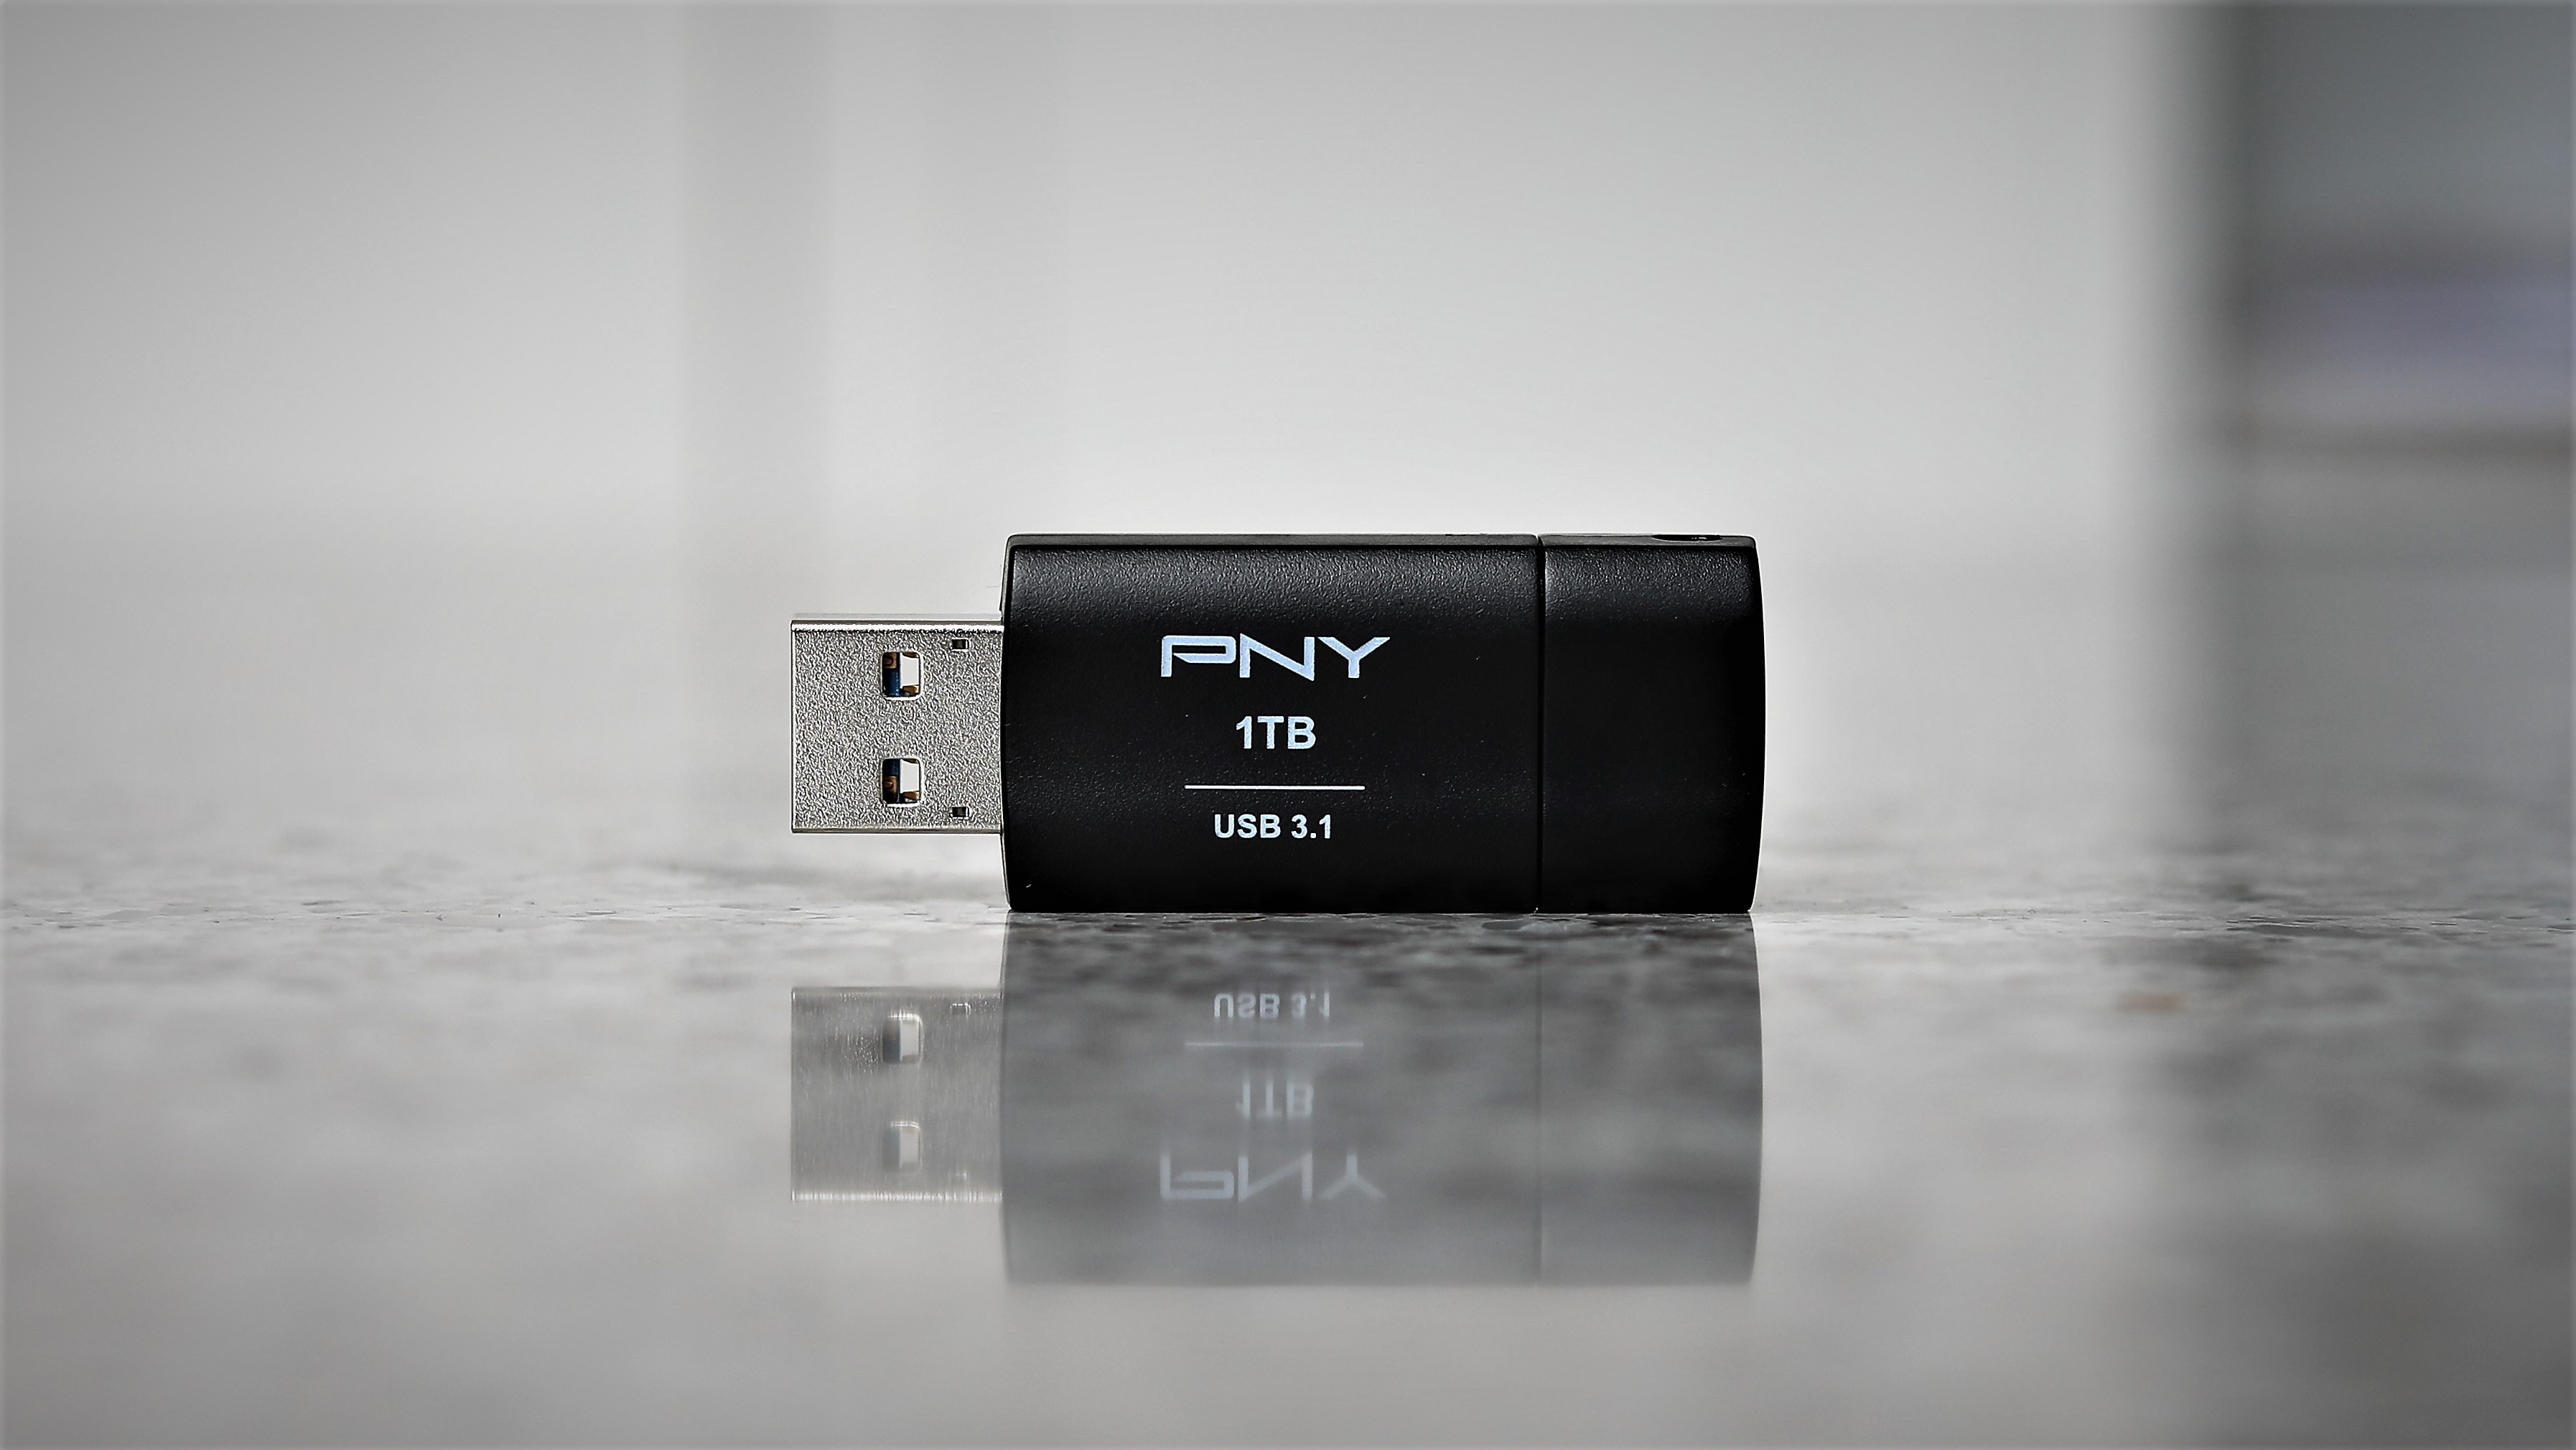 PNY 1TB Pro Elite and Elite X USB 3.0/1 Flash Drive Review - High Capacity  and Speed in a Very Small Footprint